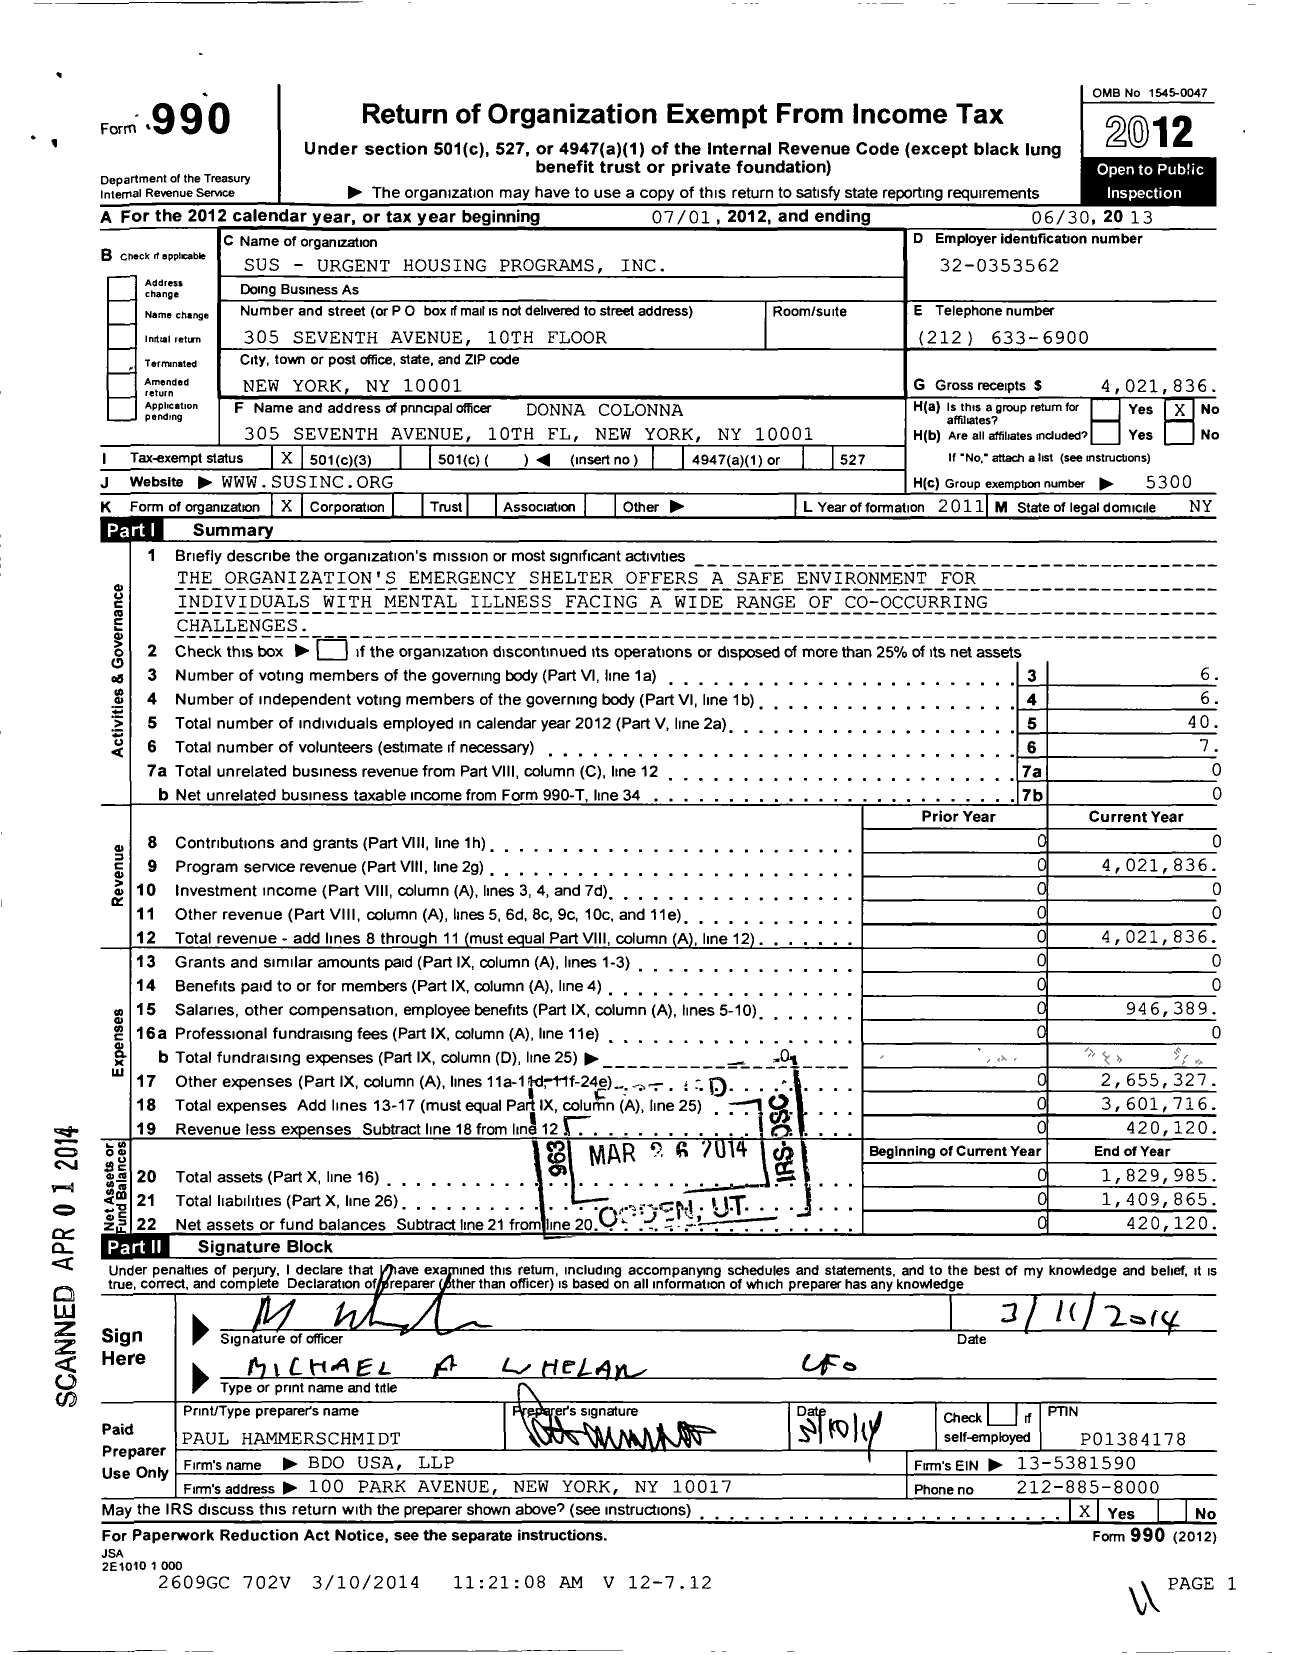 Image of first page of 2012 Form 990 for Sus - Urgent Housing Programs